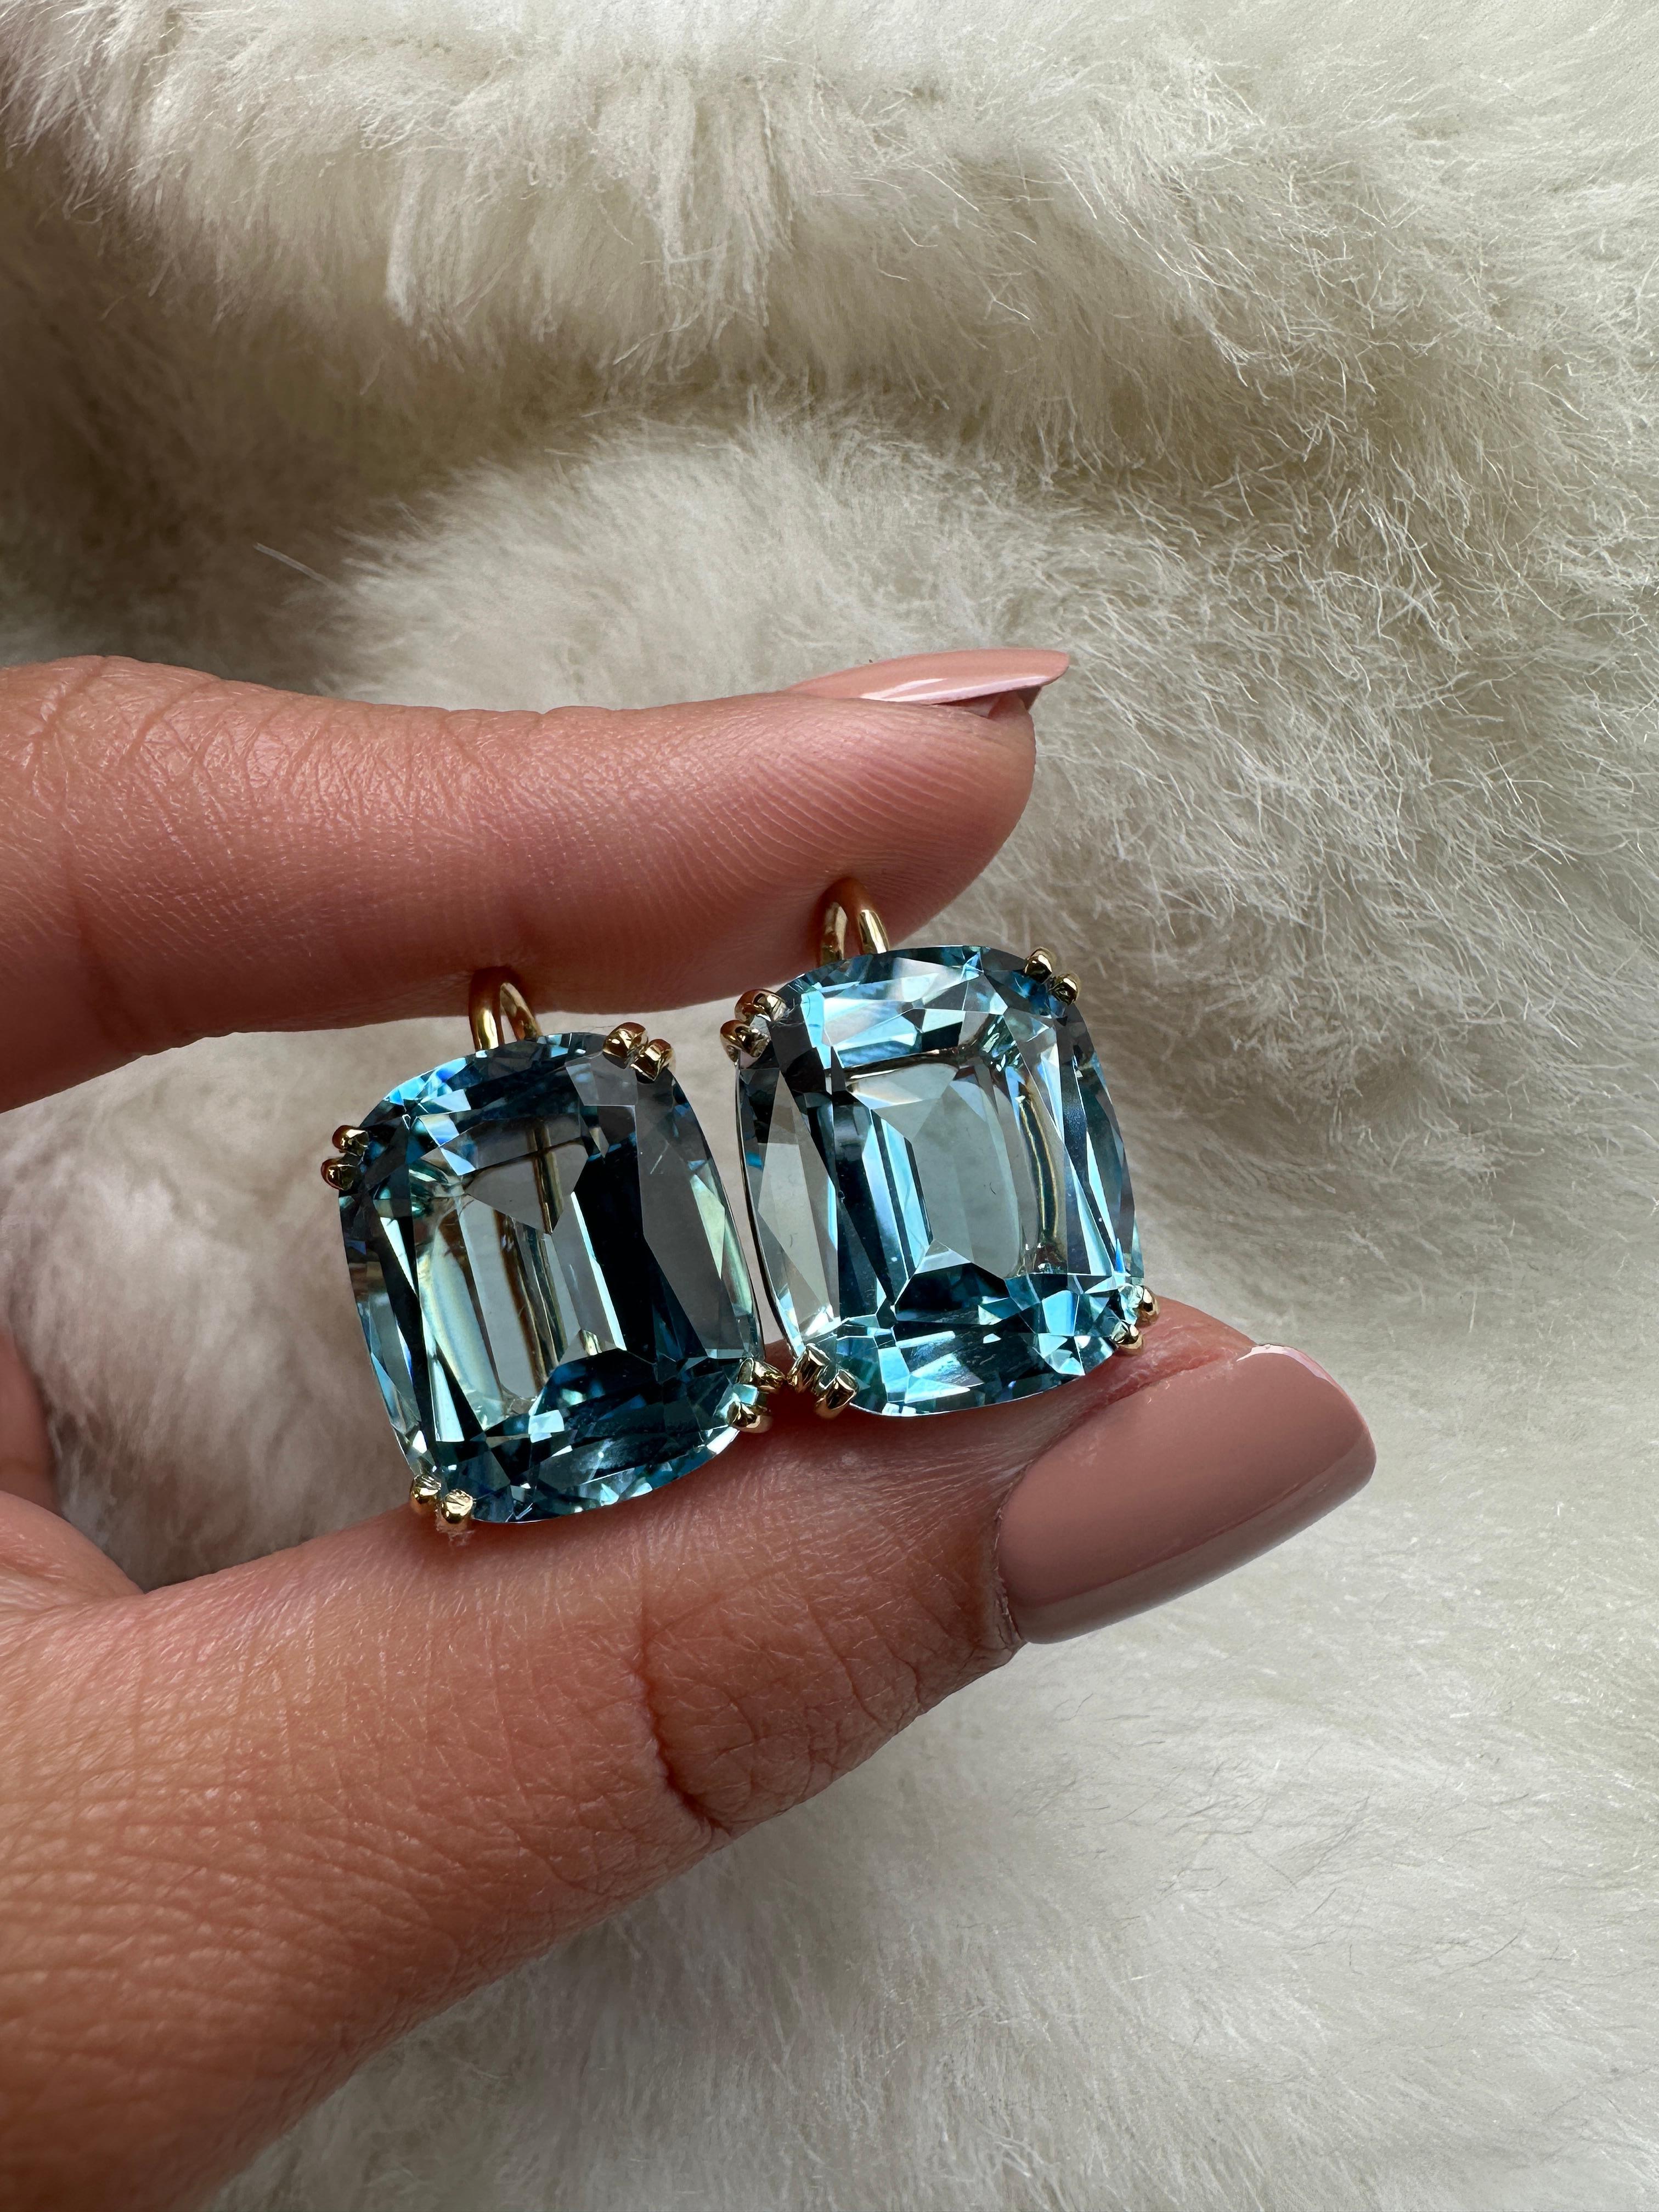 These Blue Topaz Cushion Earrings on Wire, are a dazzling piece of jewelry crafted with utmost artistry and elegance. Part of our very popular 'Gossip' Collection, these earrings embody grace and sophistication.

The focal point of these earrings is